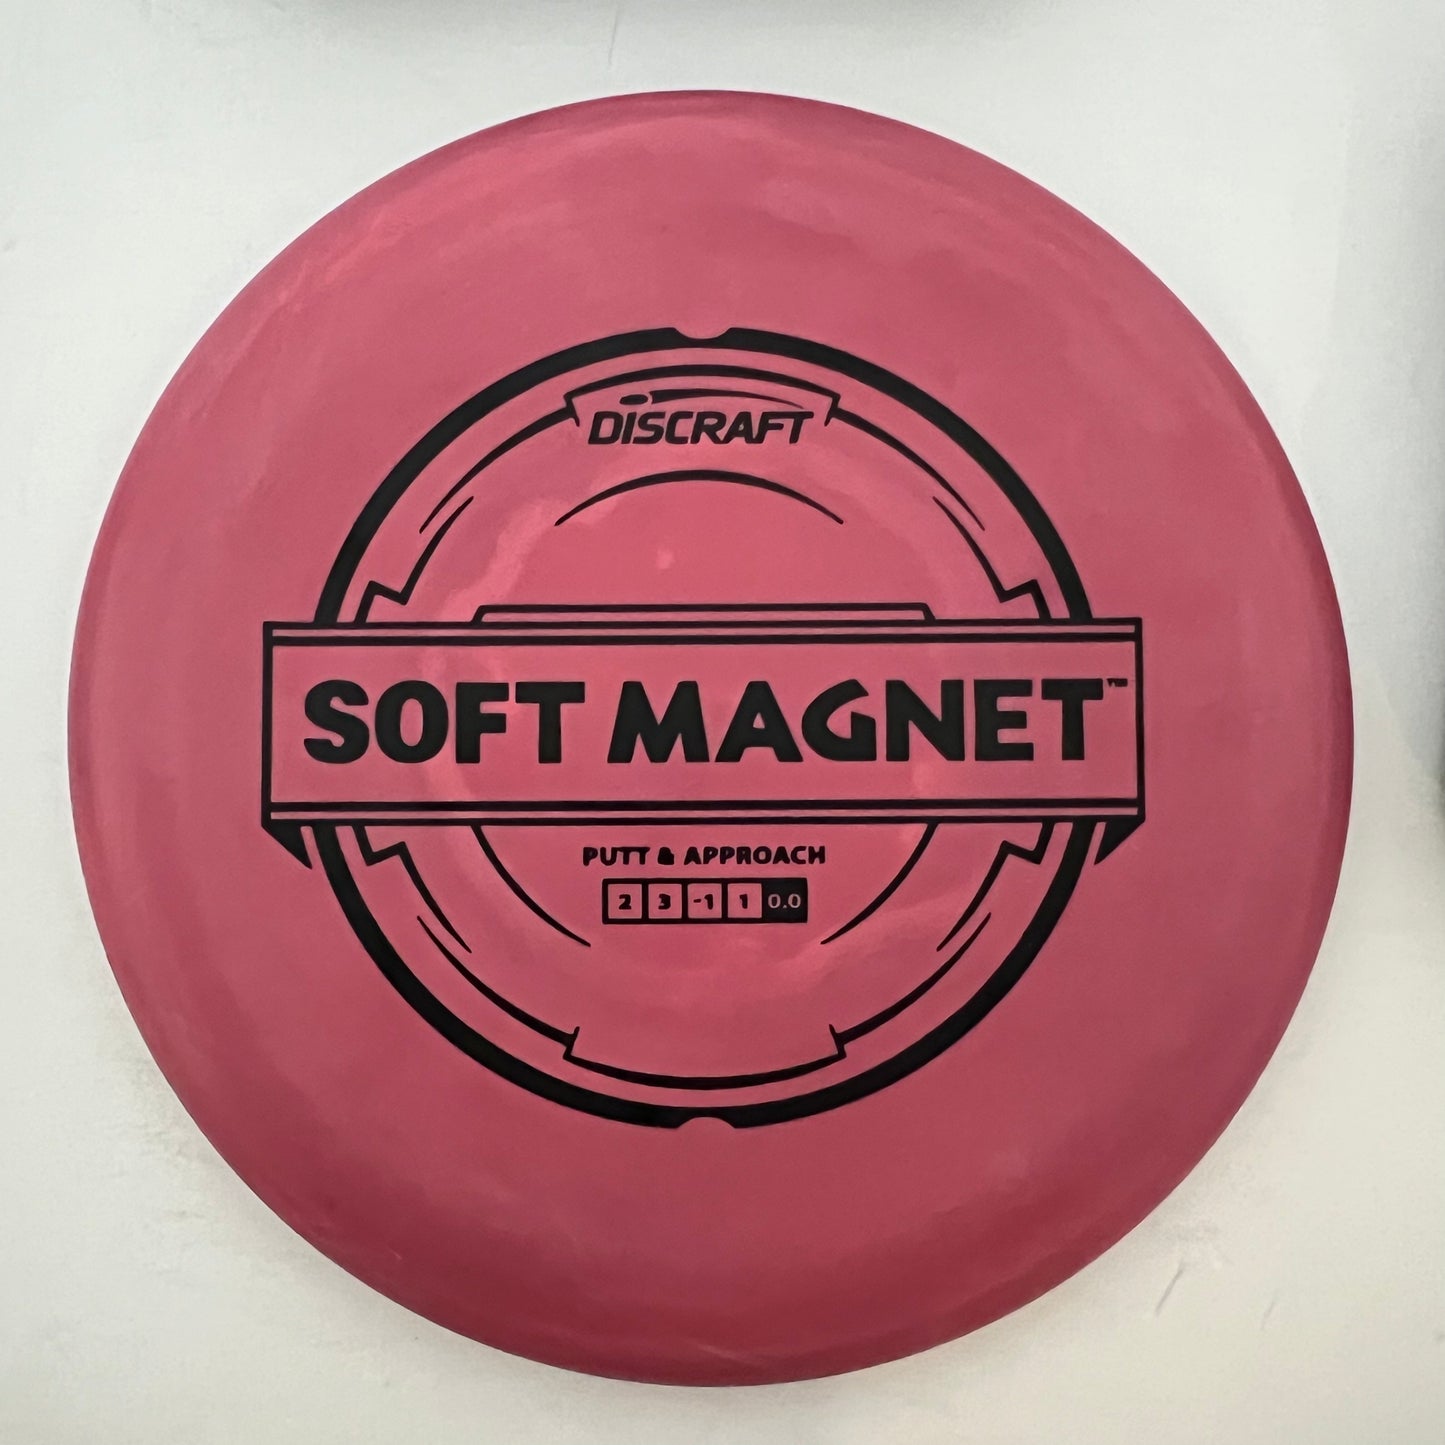 USED - Magnet